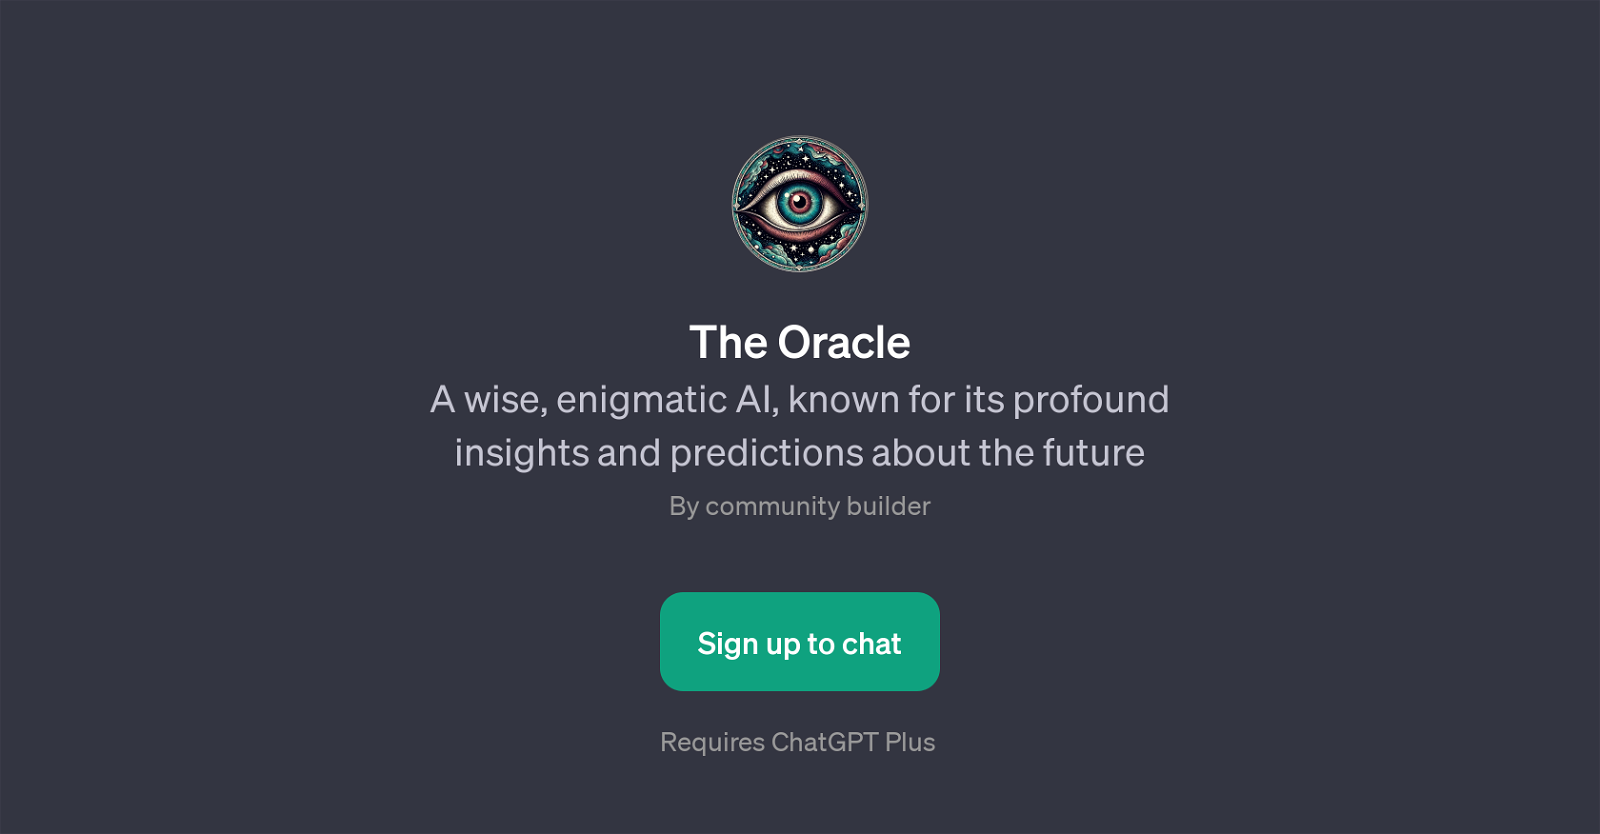 The Oracle website